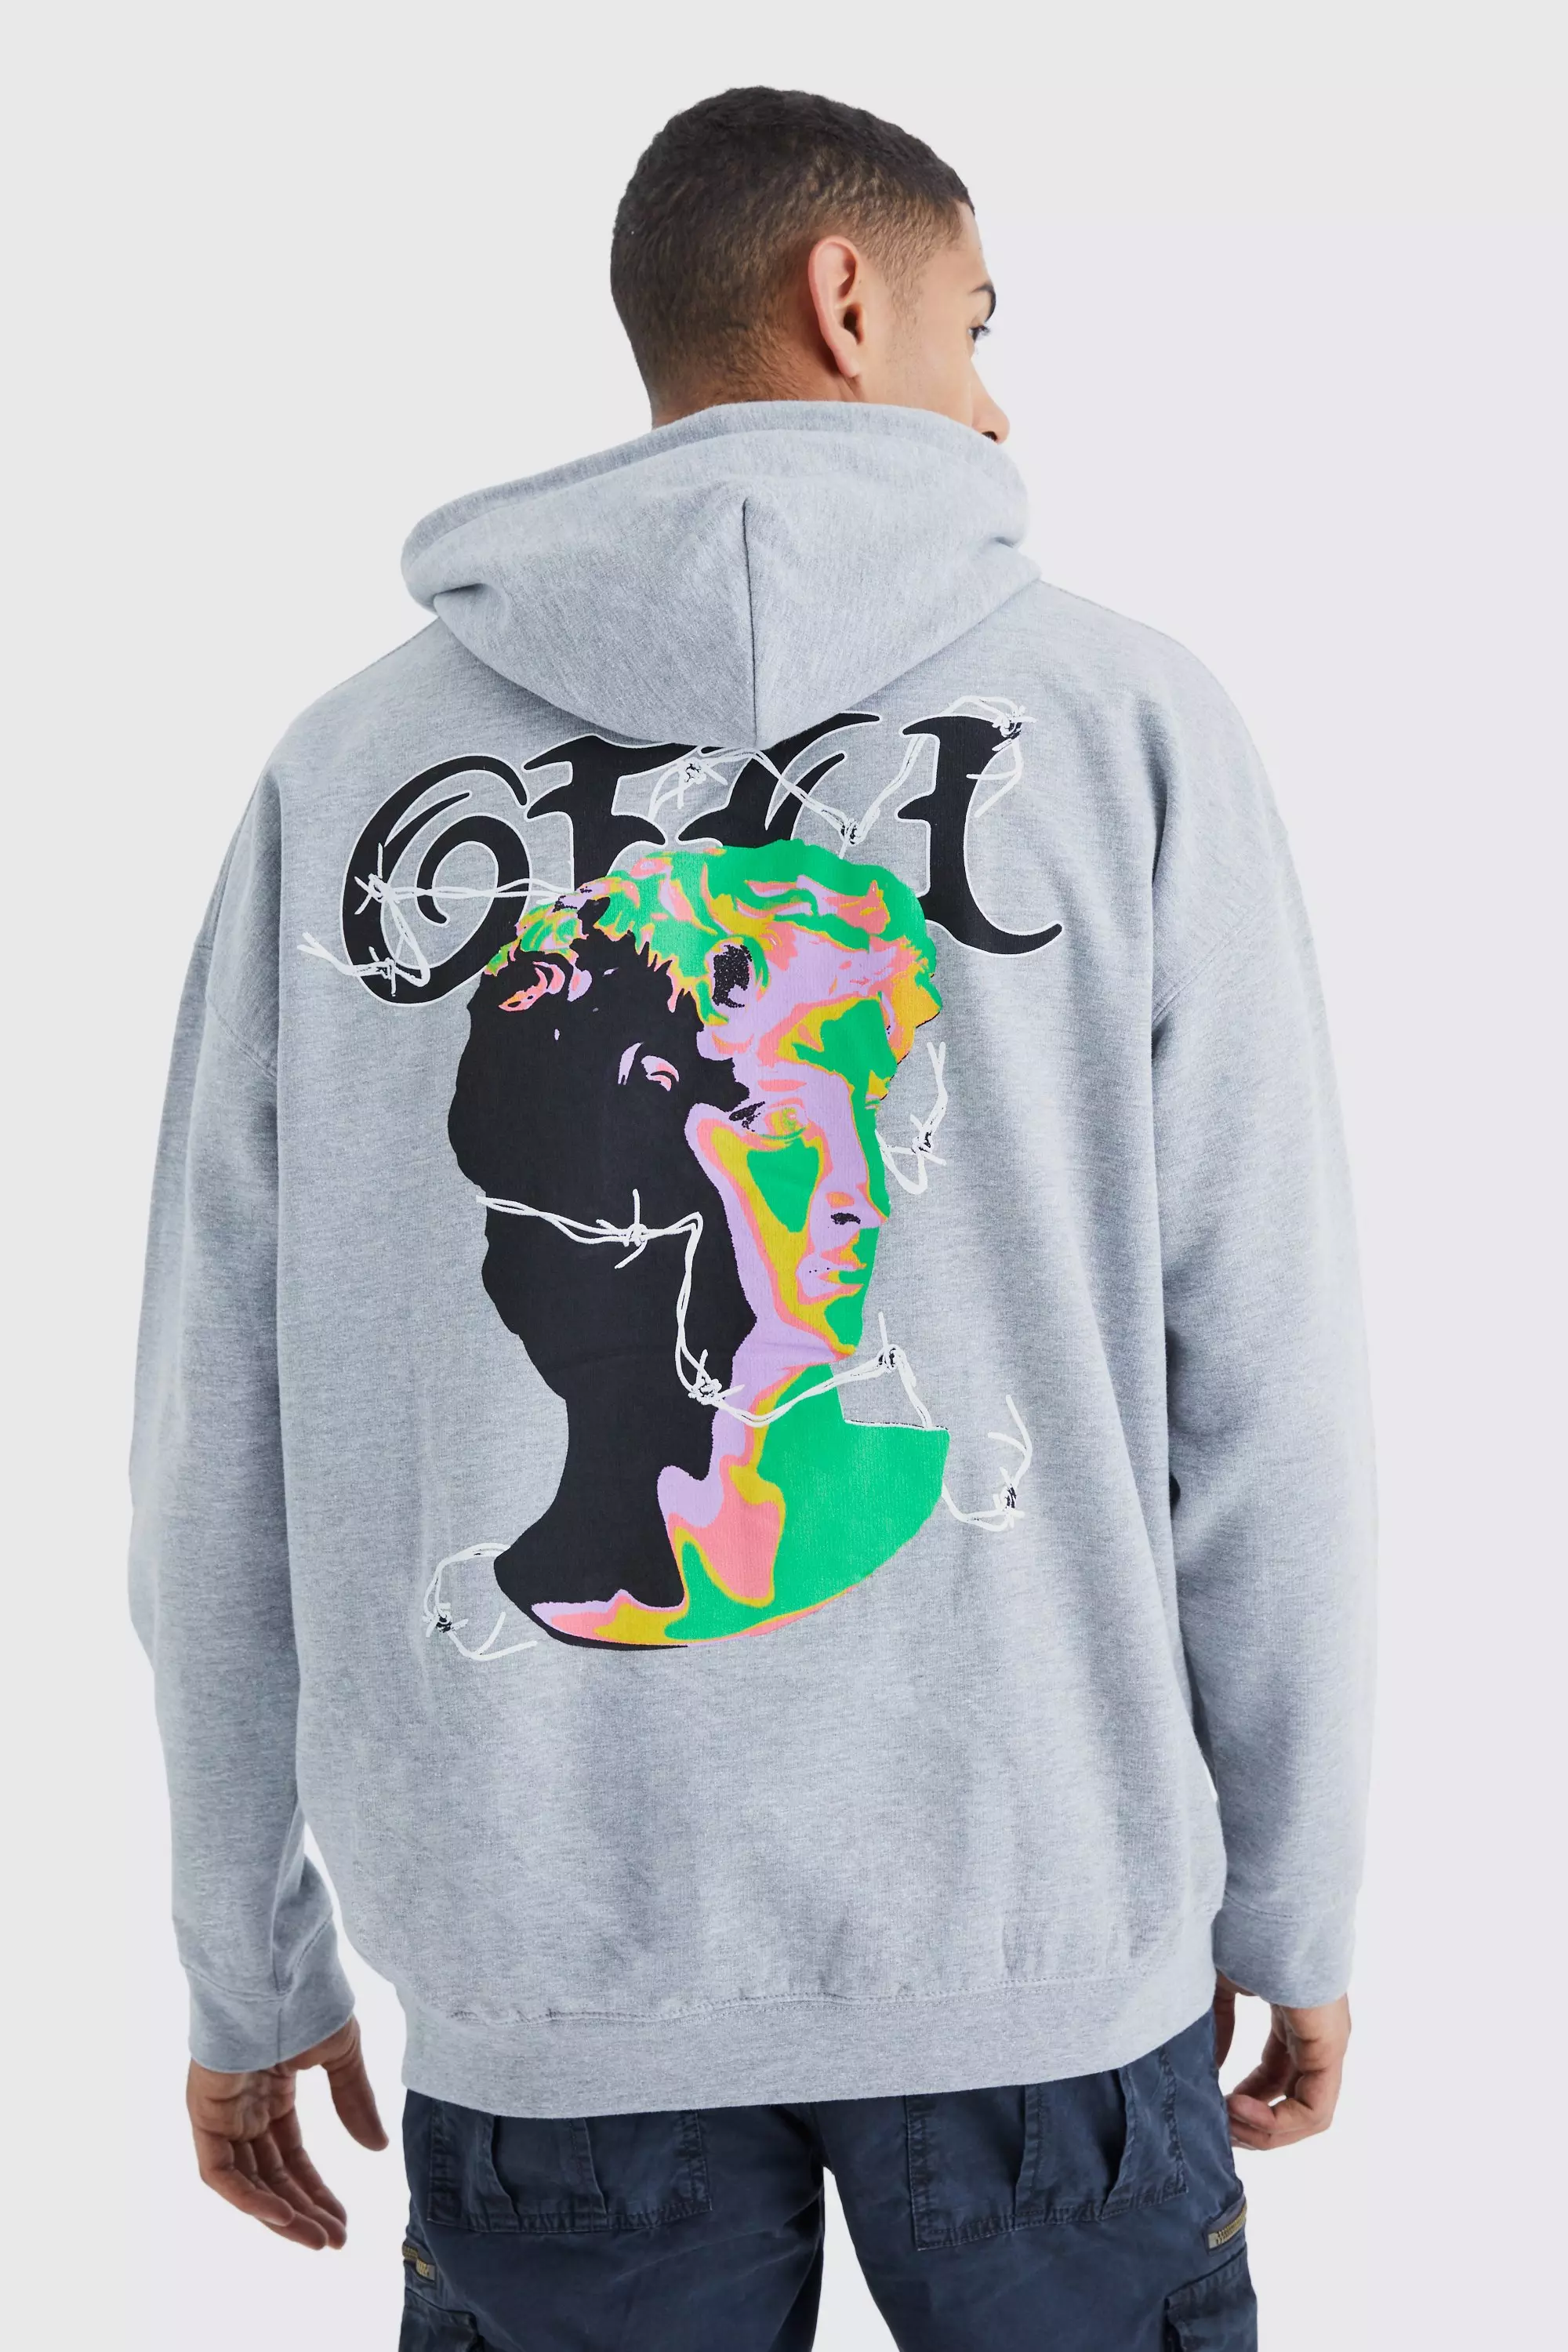 Ofcl Psychadelic Graphic Hoodie Grey marl